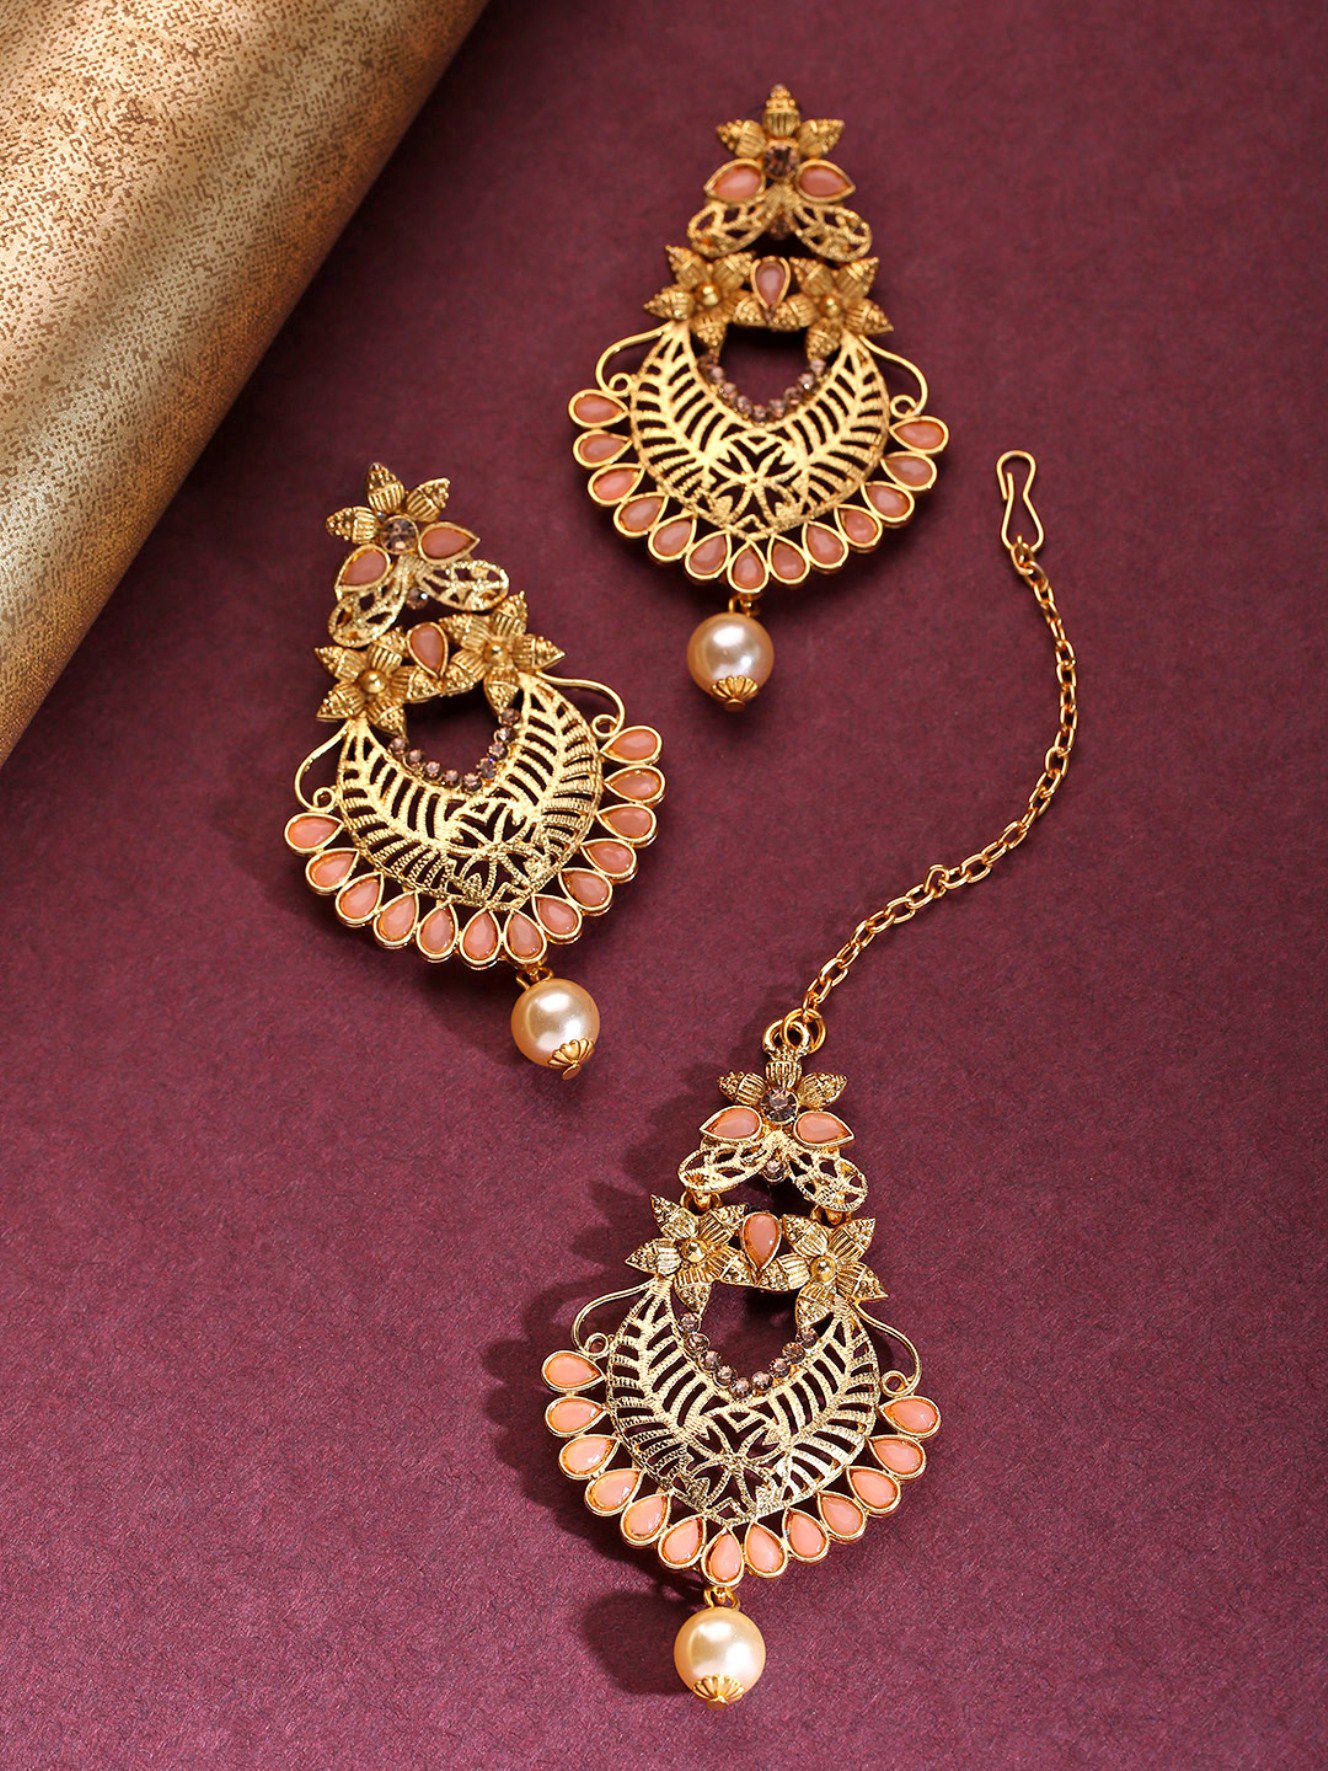     			Priyaasi Gold-Plated Peach Color Stone Studded Floral Maang Tikka With Drop Earrings Set